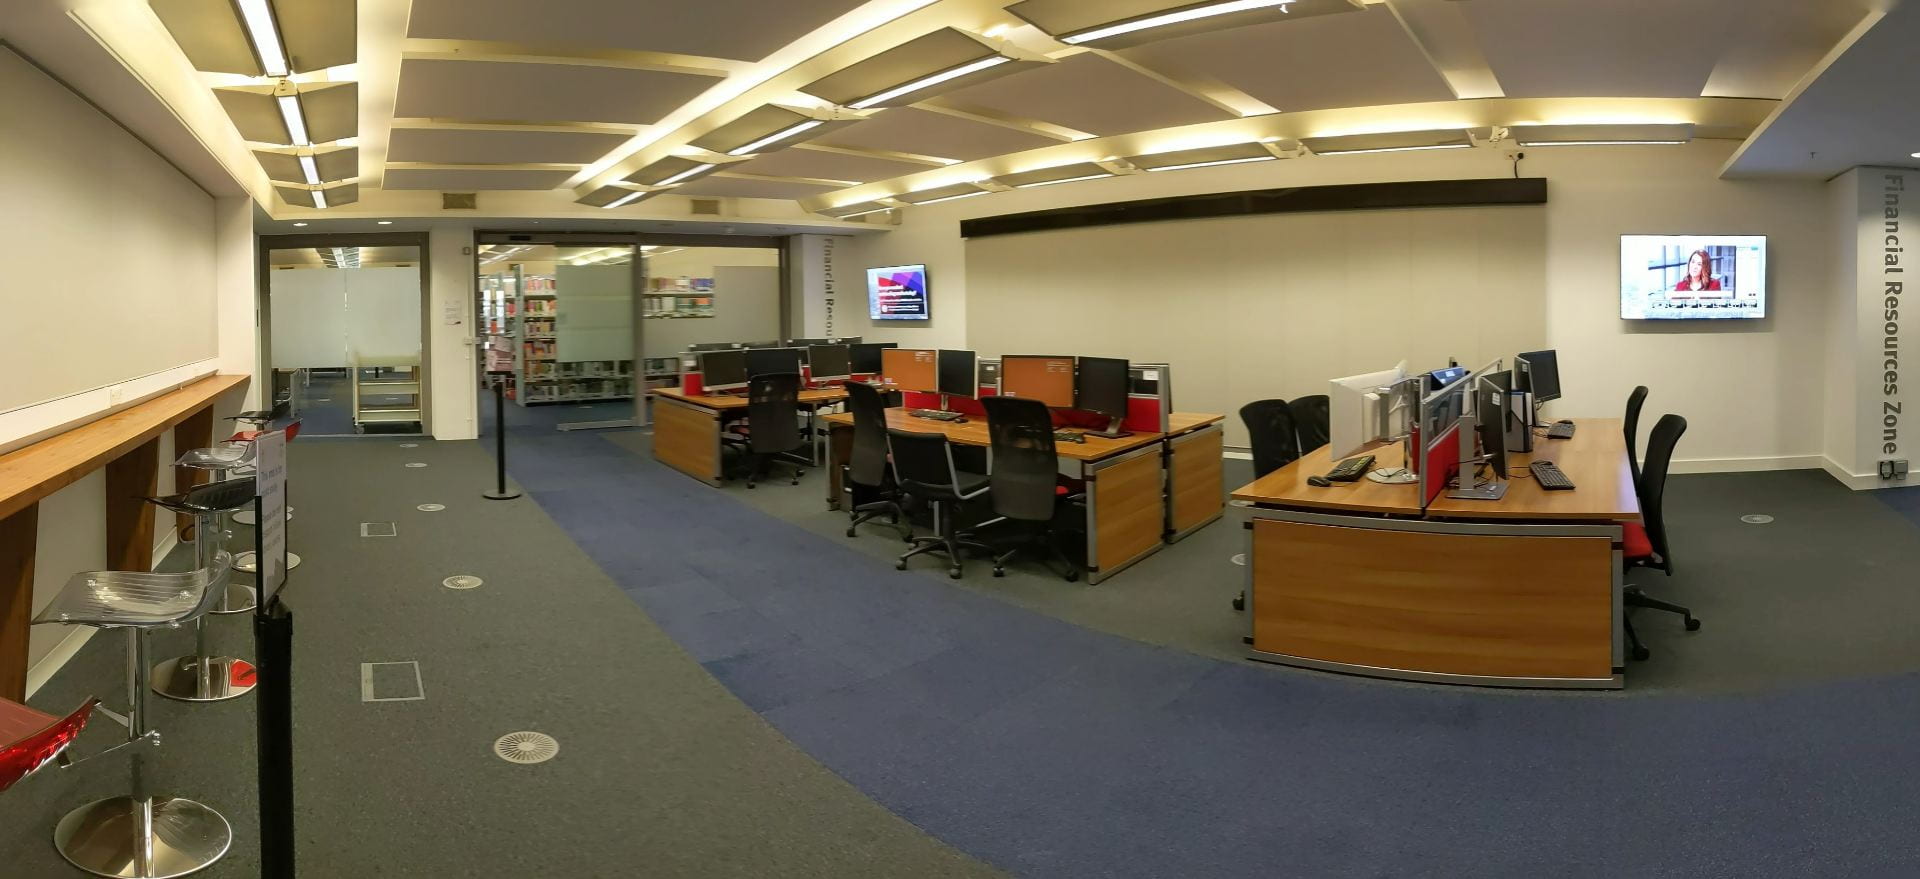 Panoramic image of a library space with three blocks of four computers, underneath a ticker and two video screens. The colour scheme is grey, brown and teal.